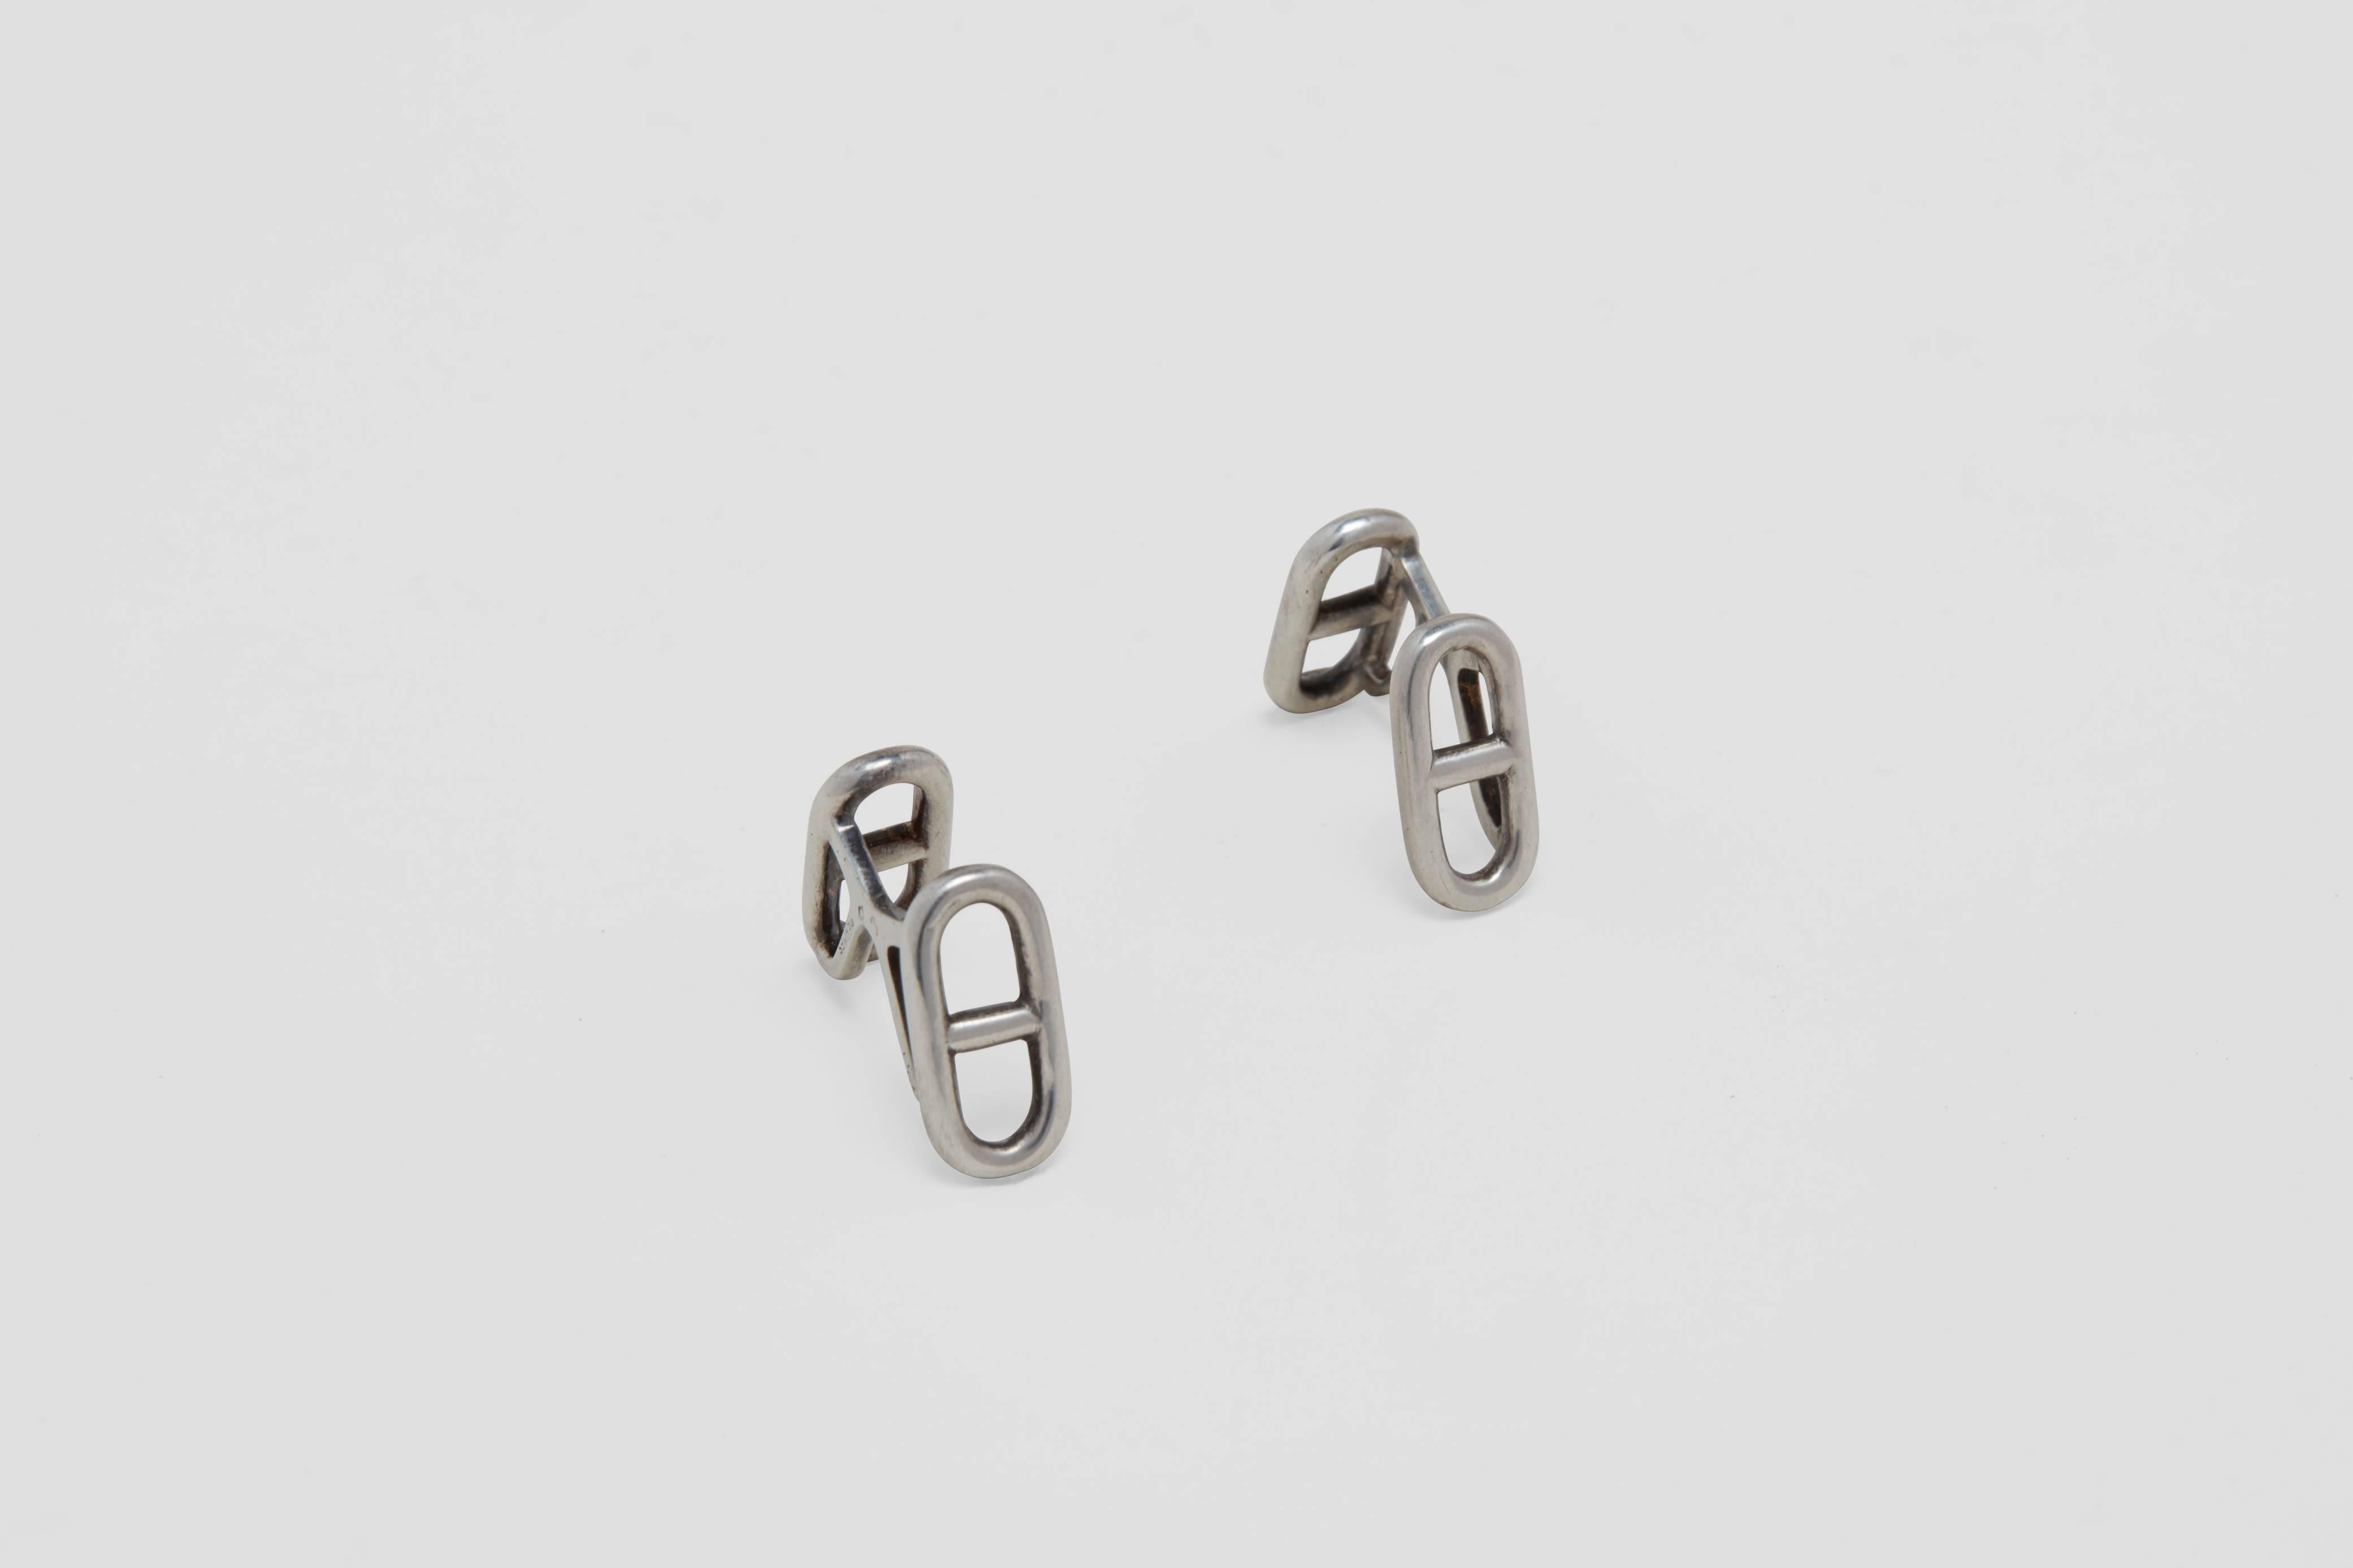 A pair of sterling silver cufflinks made in the form of a classic nautical anchor chain link design.  This exceptional, elegant and simple cufflink was made by the luxury retailer; Hermès.  This design, the 'chaine d'ancre' or 'anchor link chain' is